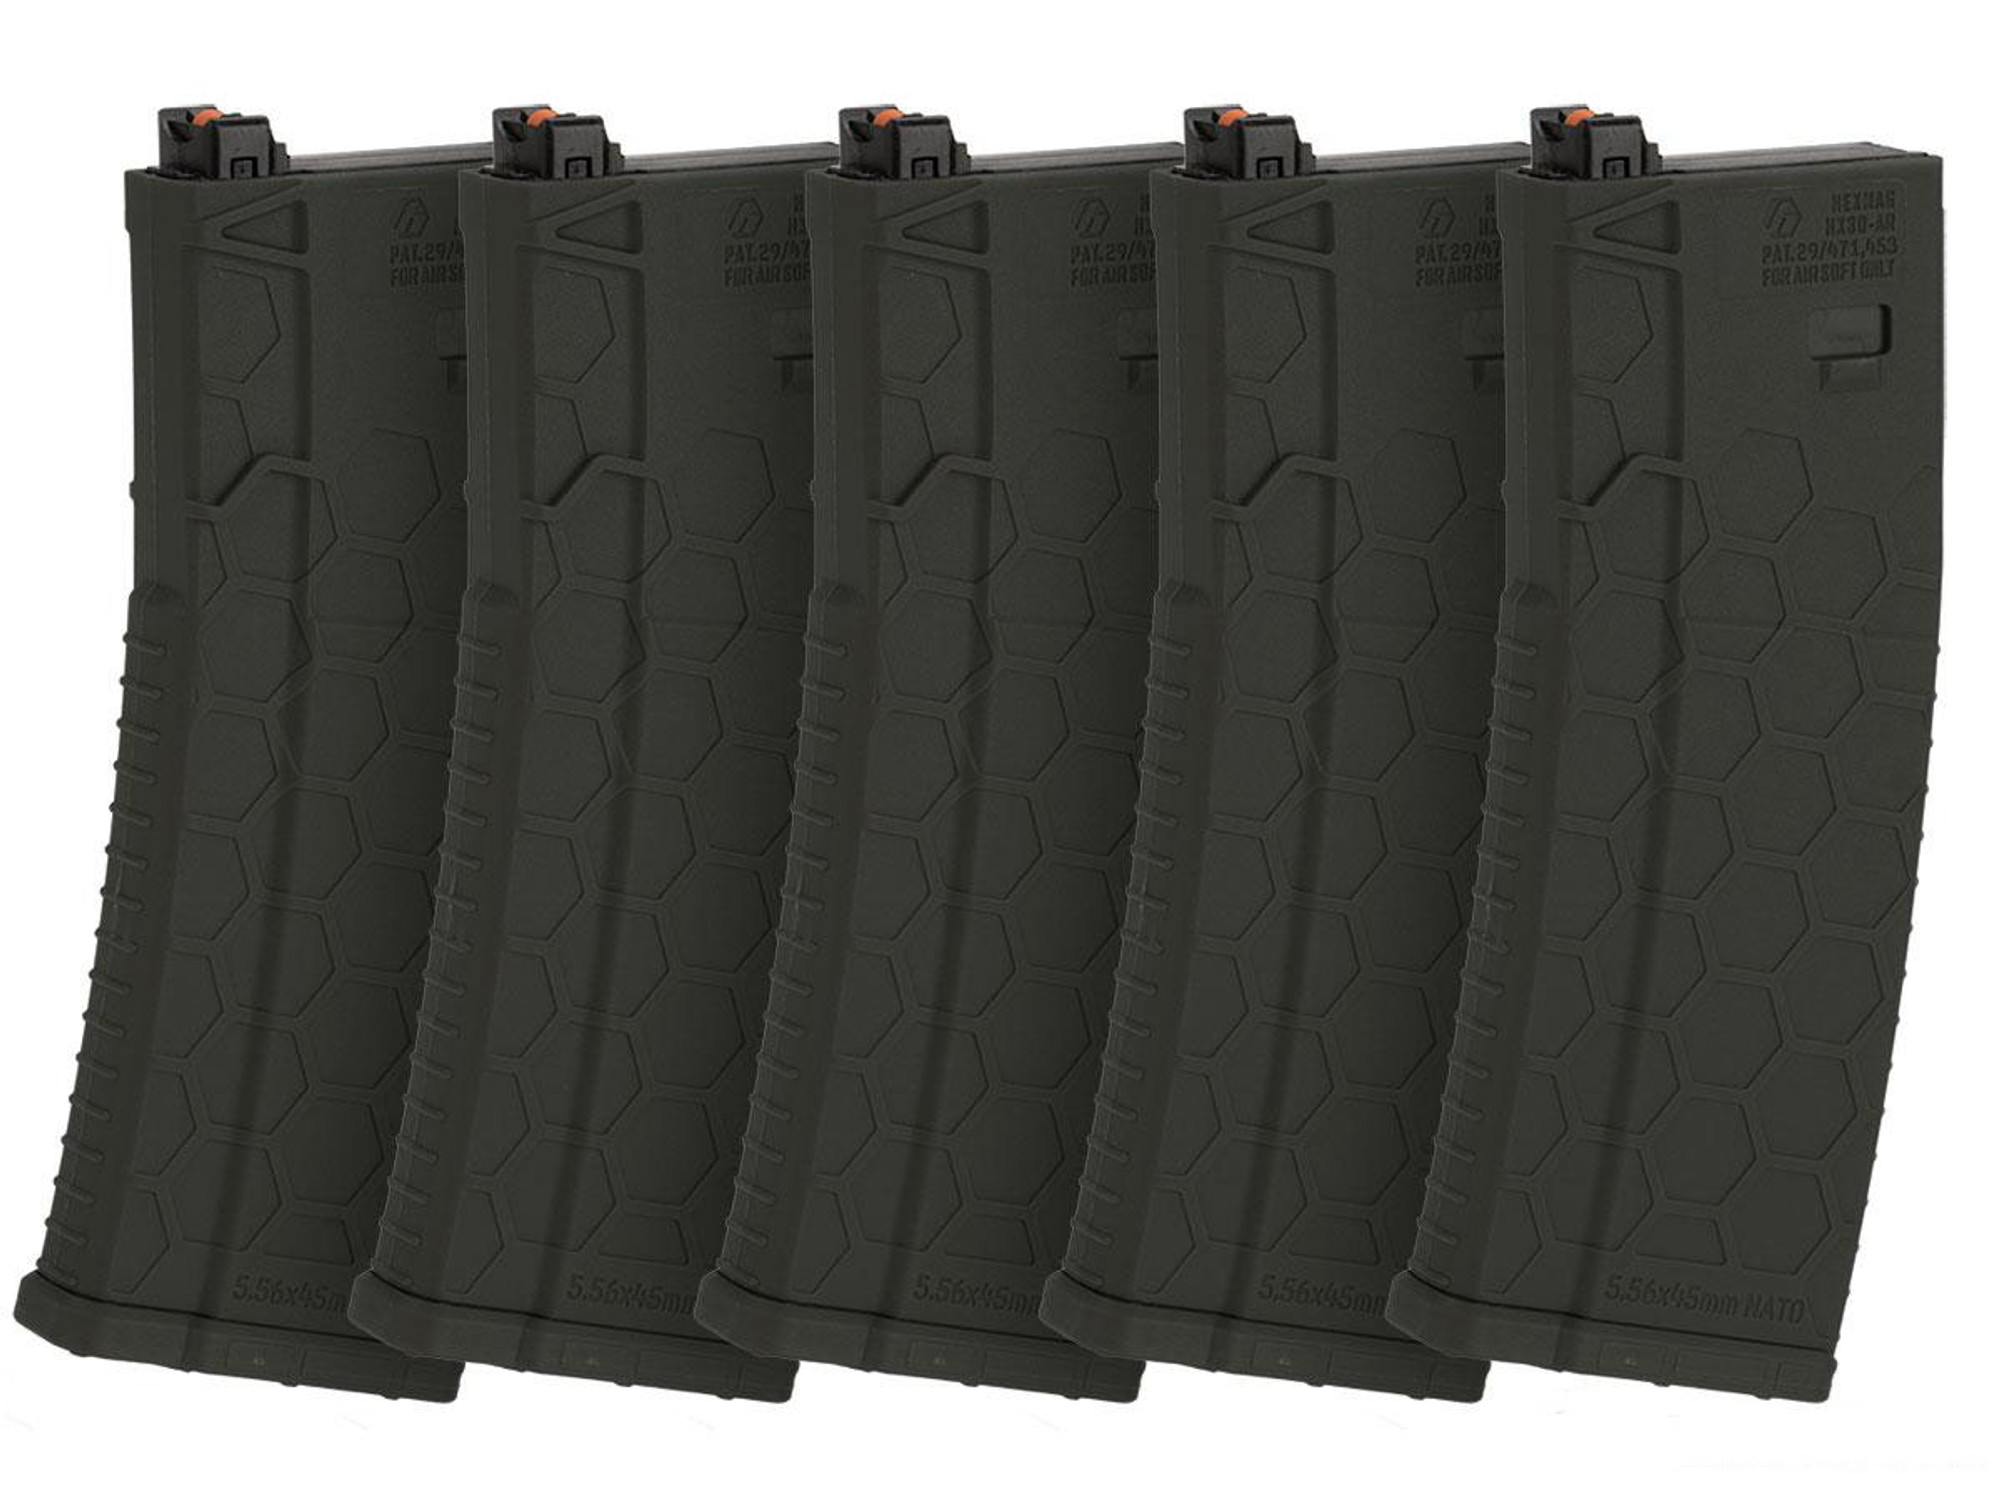 Hexmag Airsoft 120rds Polymer Mid-Cap Magazine for M4 / M16 Series Airsoft PTW Rifles - Box of 5 (Color: OIlive Drab)